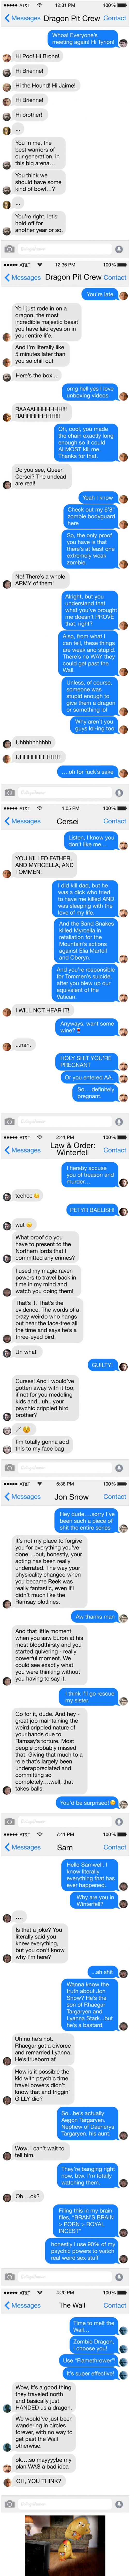 7-Text-Messages-Summed-Up-Game-Of-Thrones-Season-7-Finale.jpg